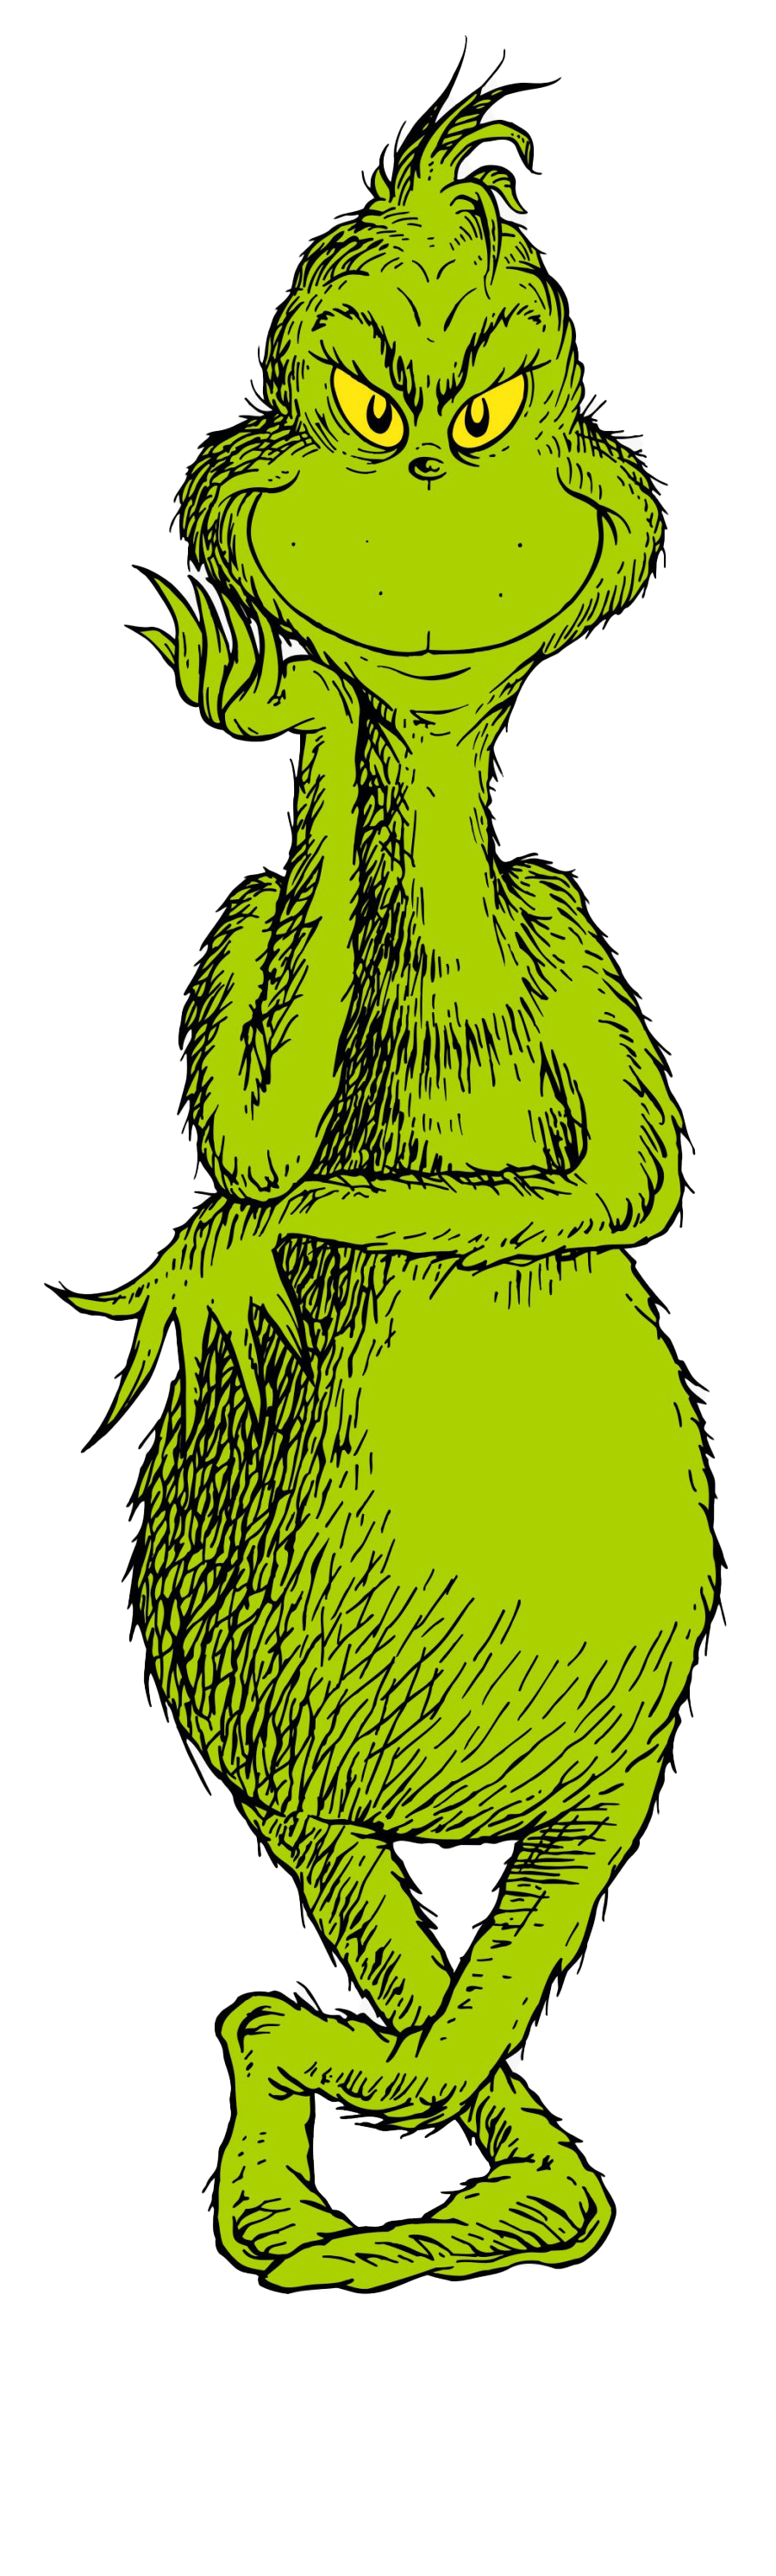 The Grinch PNG Photos, Transparent Png Image PngNice